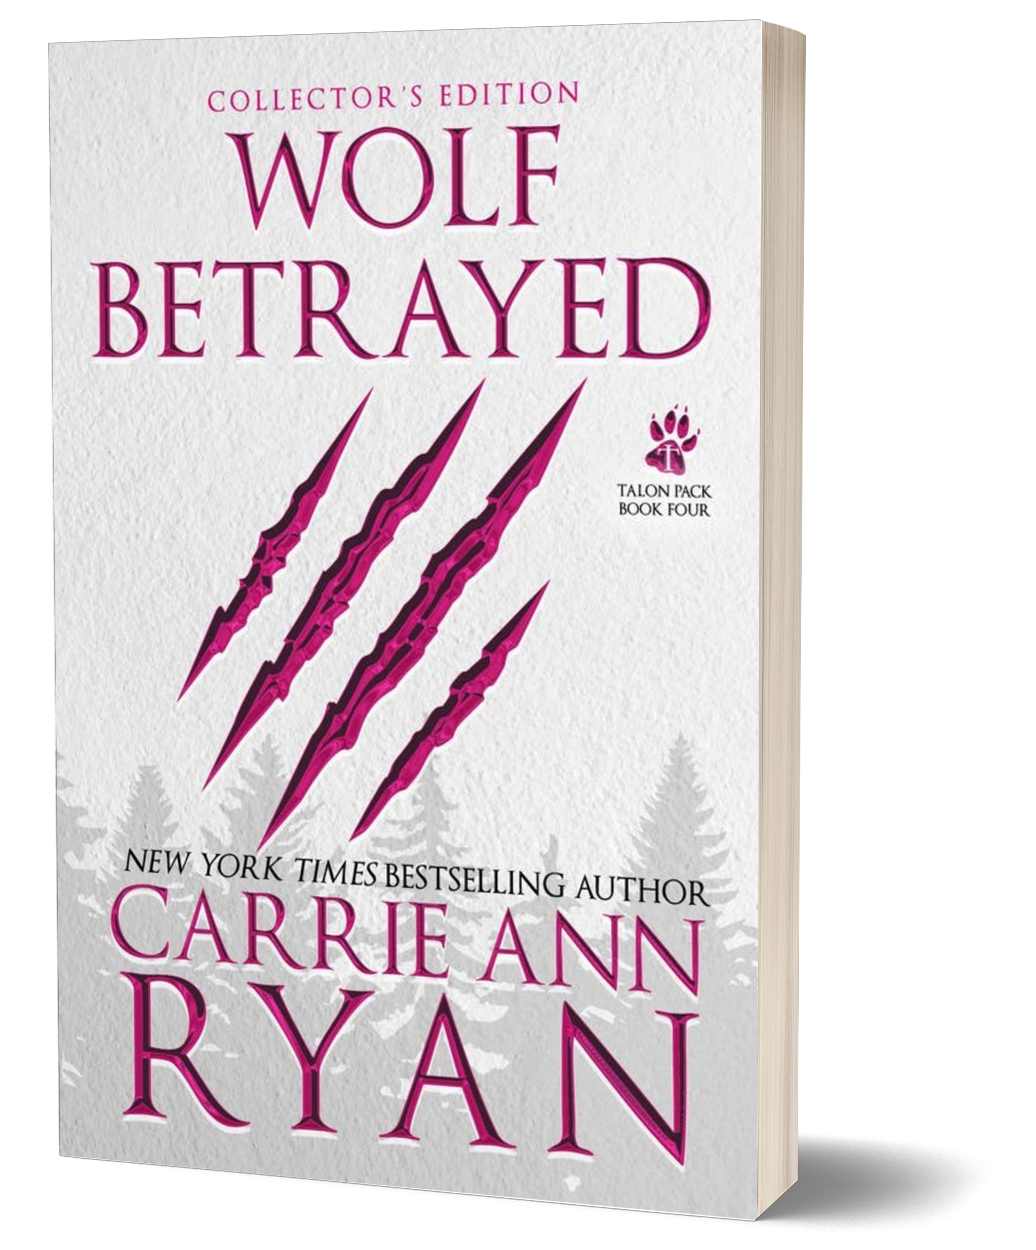 Wolf Betrayed - Special Edition Paperback